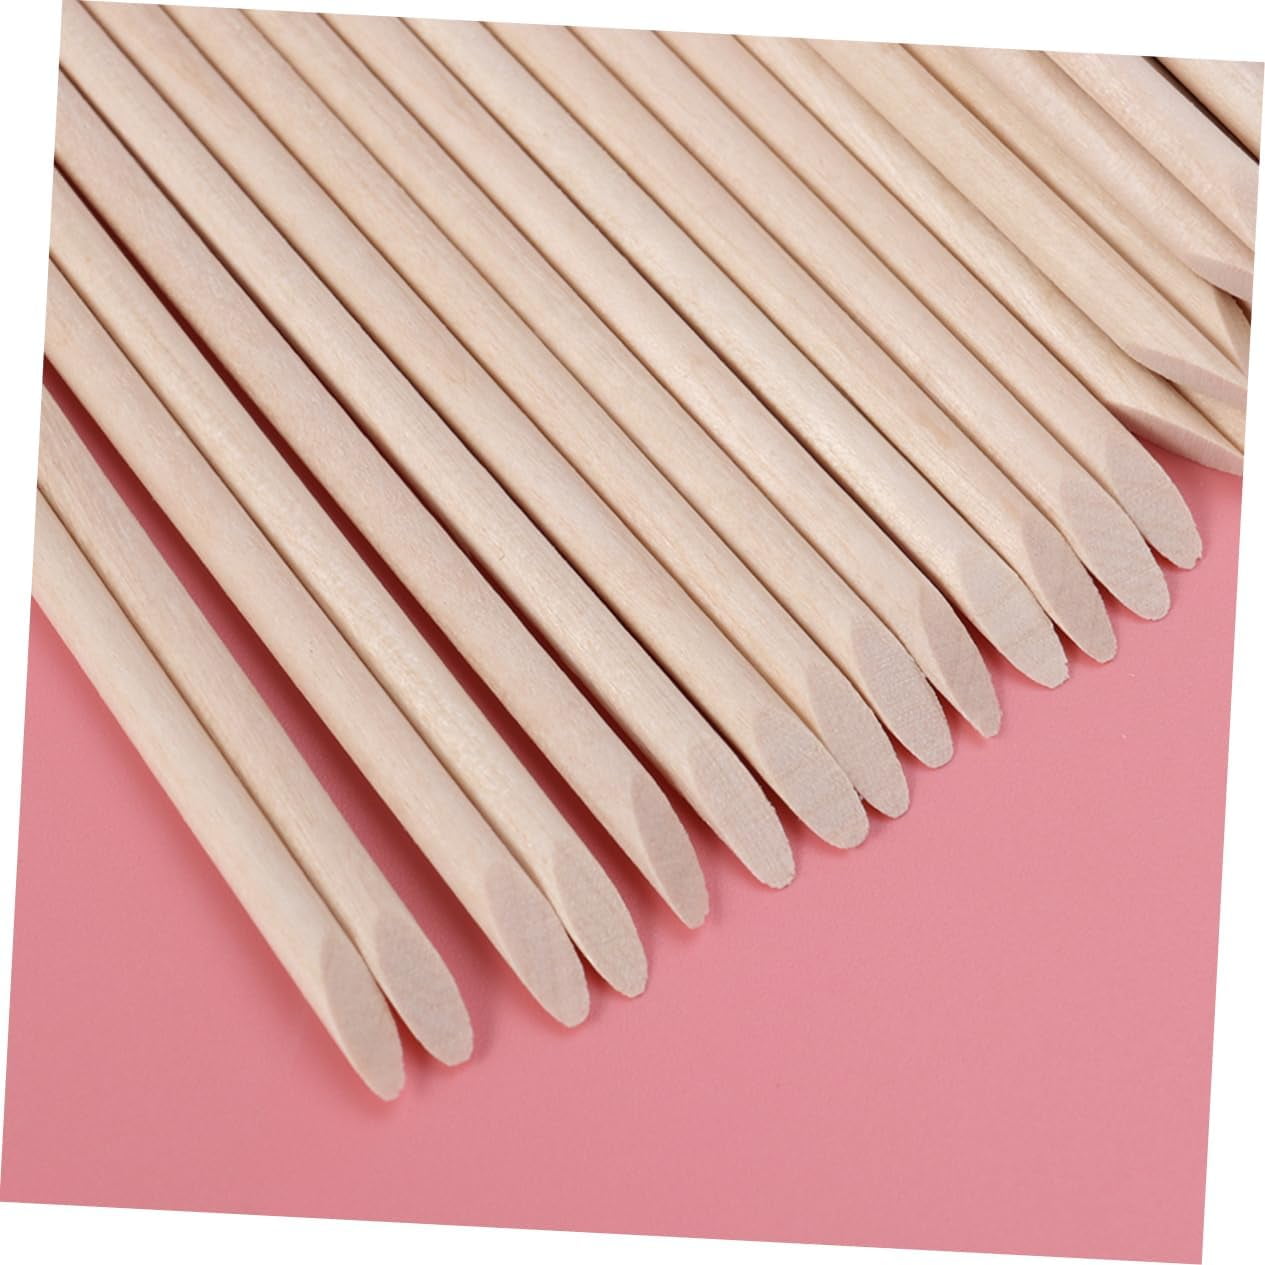 Sowaka 50 Pcs Orange Wood Sticks for Nails Natural Double Sided  Multifunctional Wooden Mini Cuticle Pusher Remover Tool Kit for Manicure  Pedicure